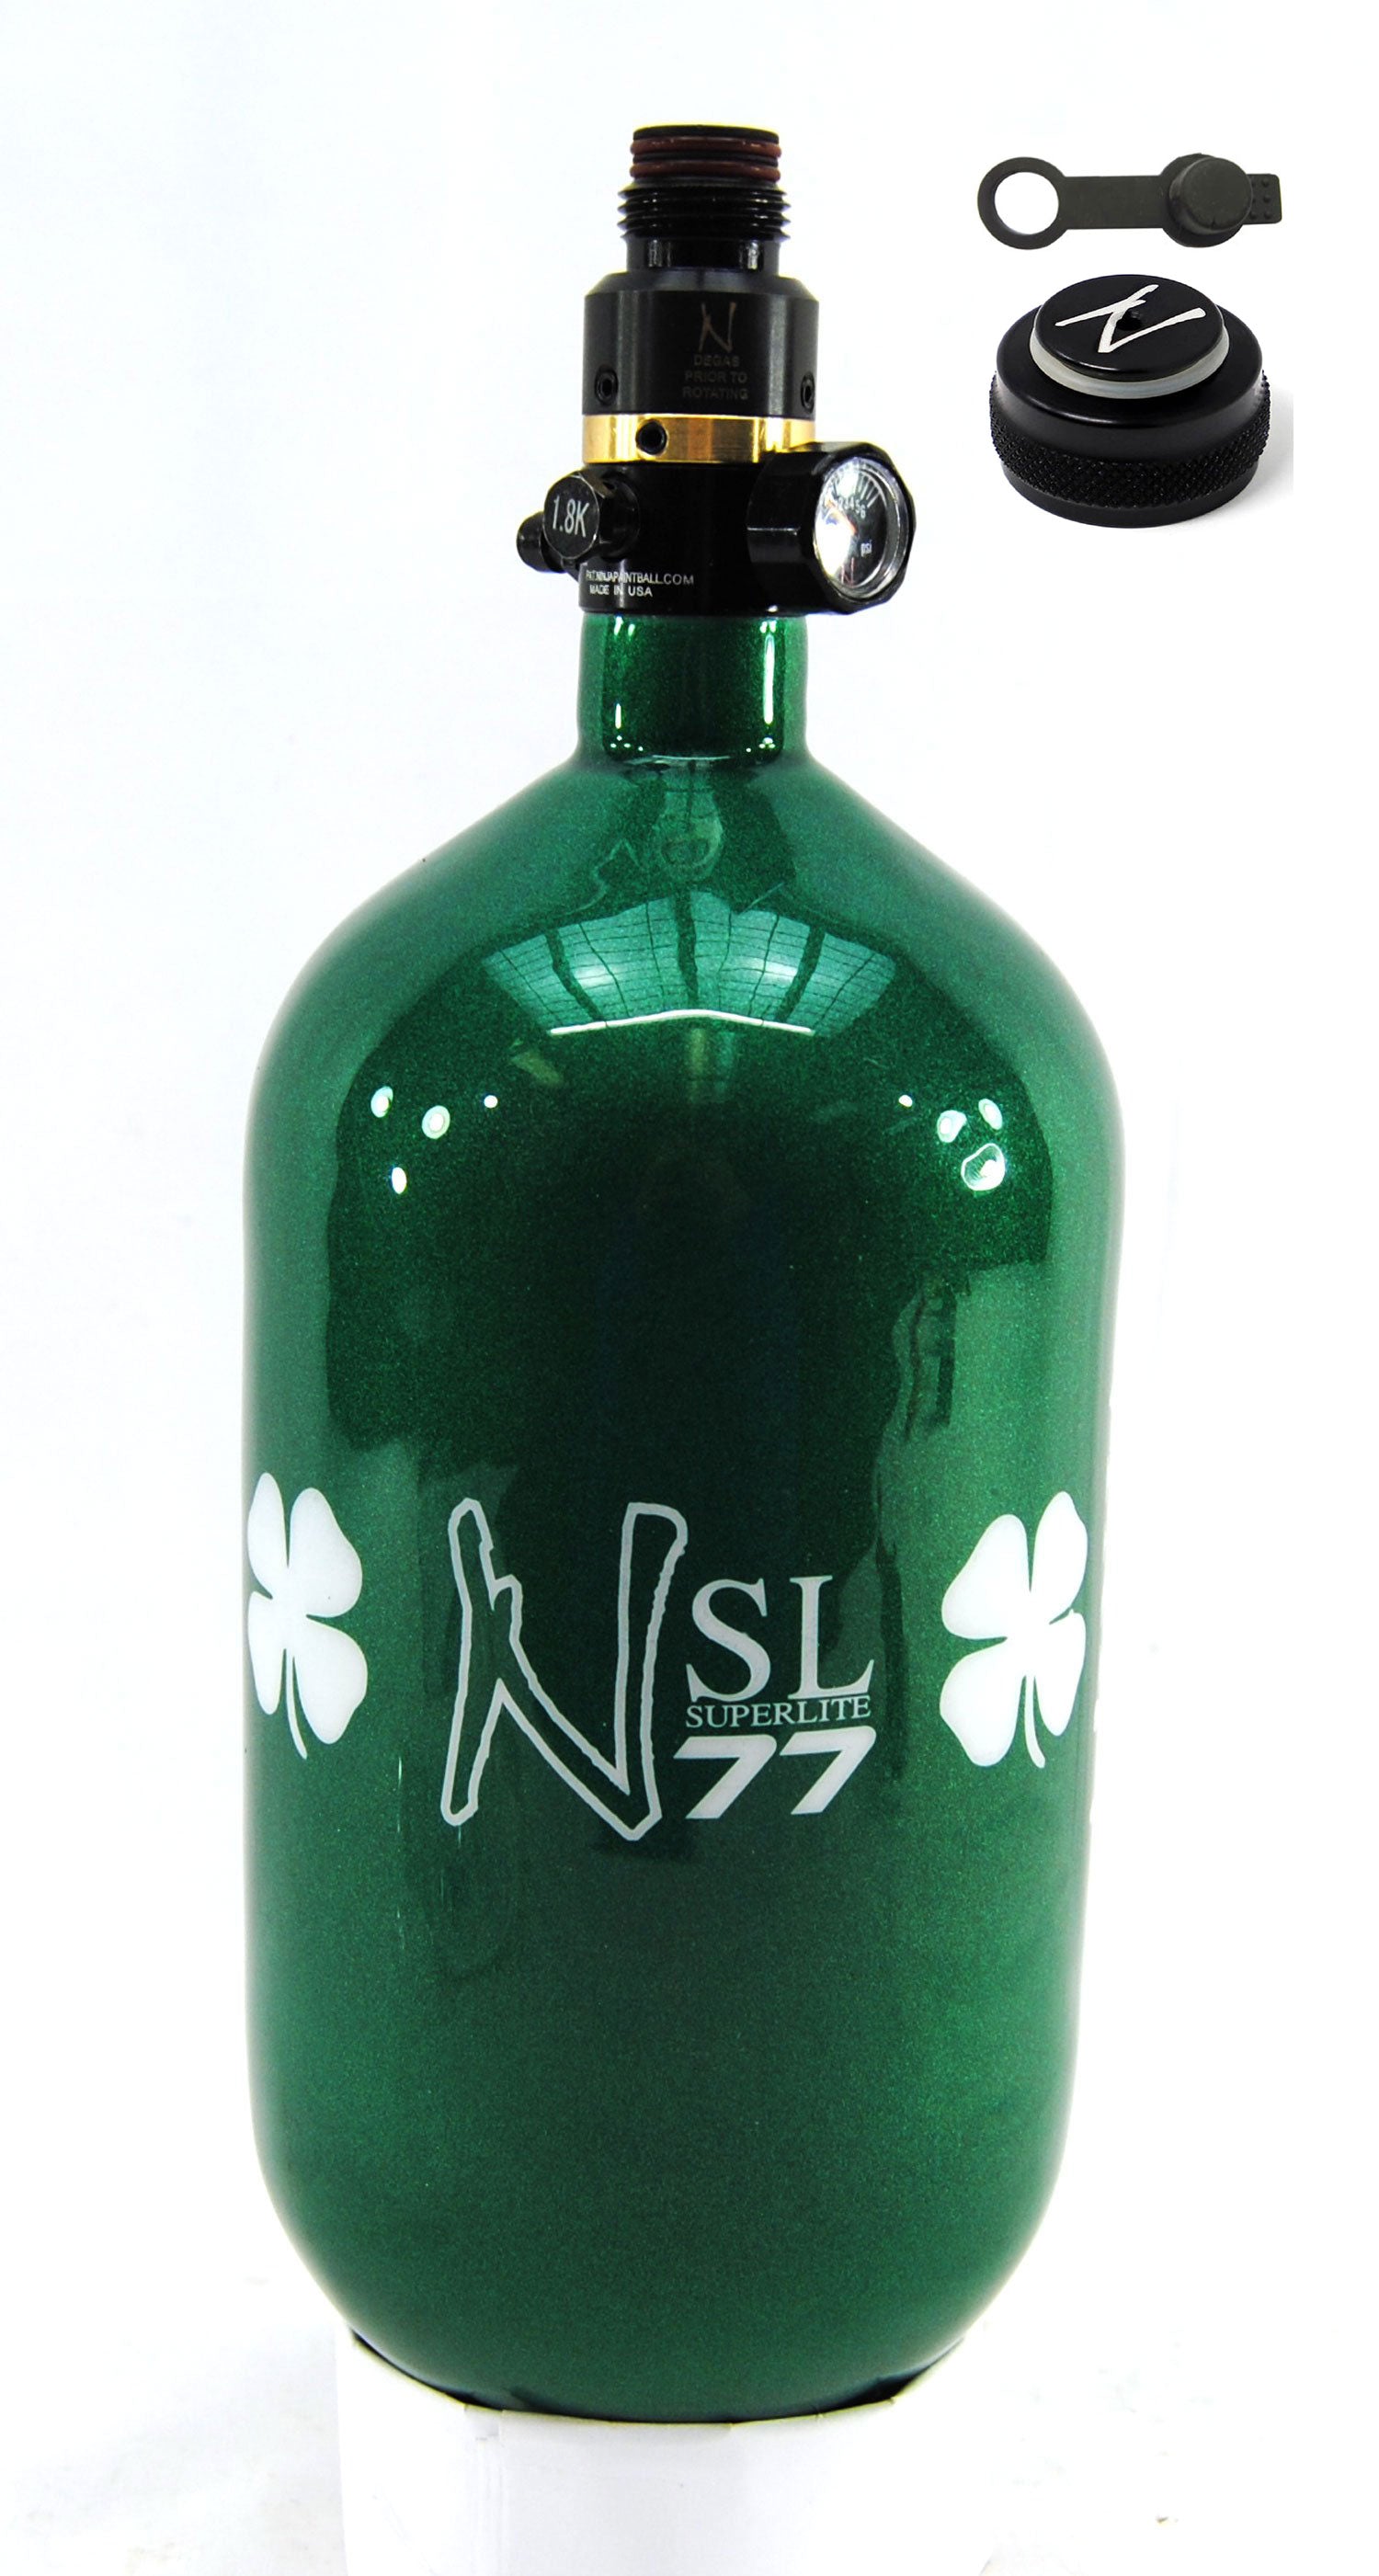 Ninja 77ci 4500psi SL2 HPA Tank with Thread Protector/Nipple Cover - Limited Edition St. Patrick's Day Lucky Clover - Ninja Paintball